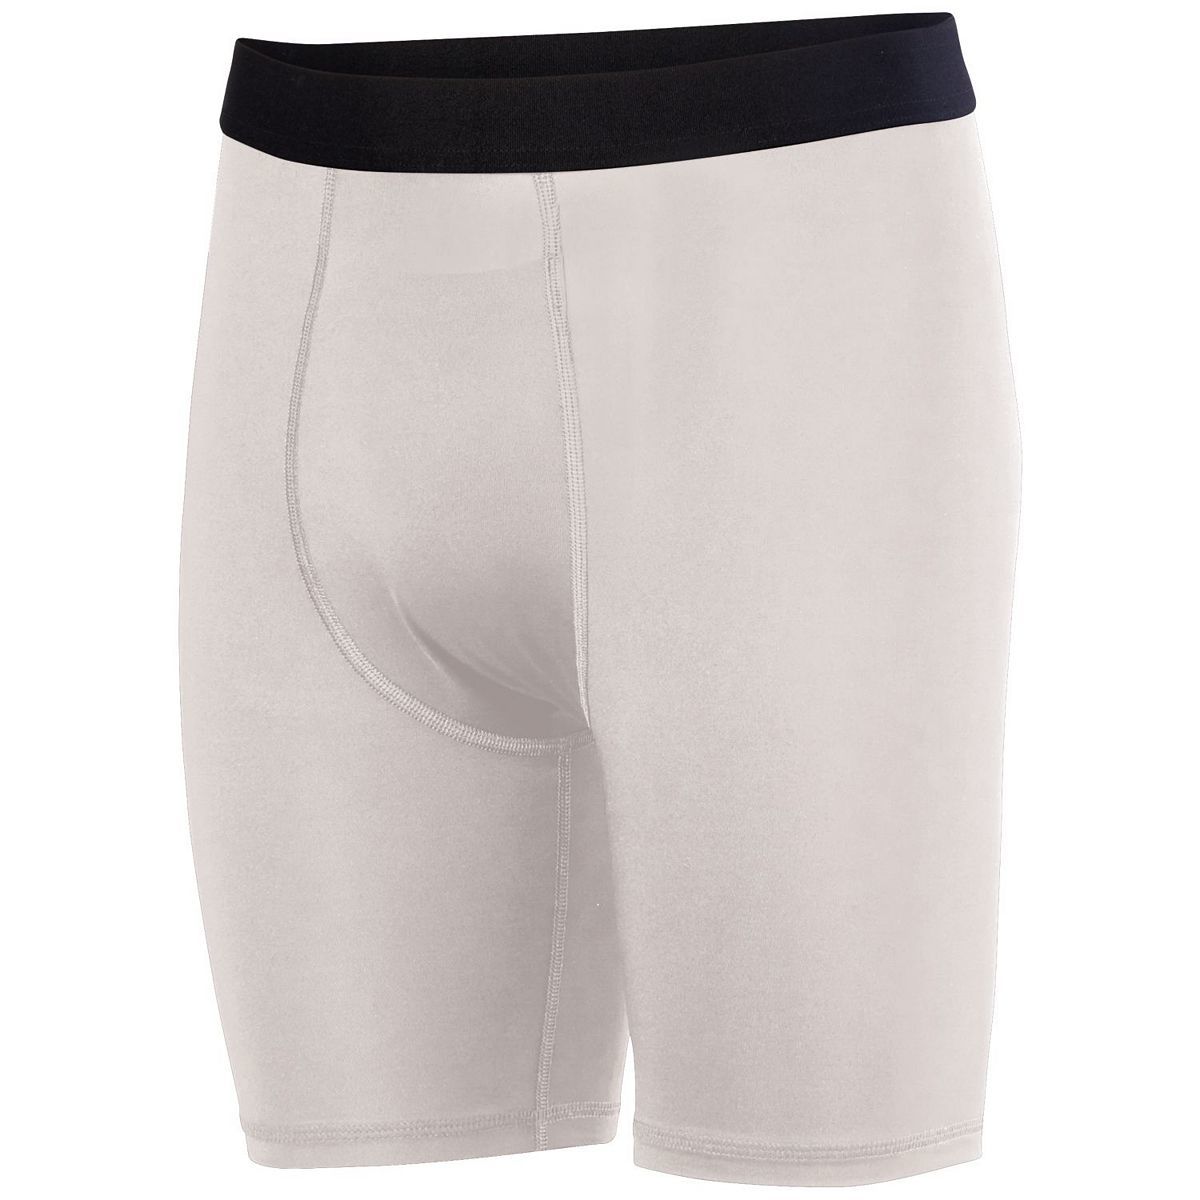 Youth Hyperform Compression Shorts - 2616